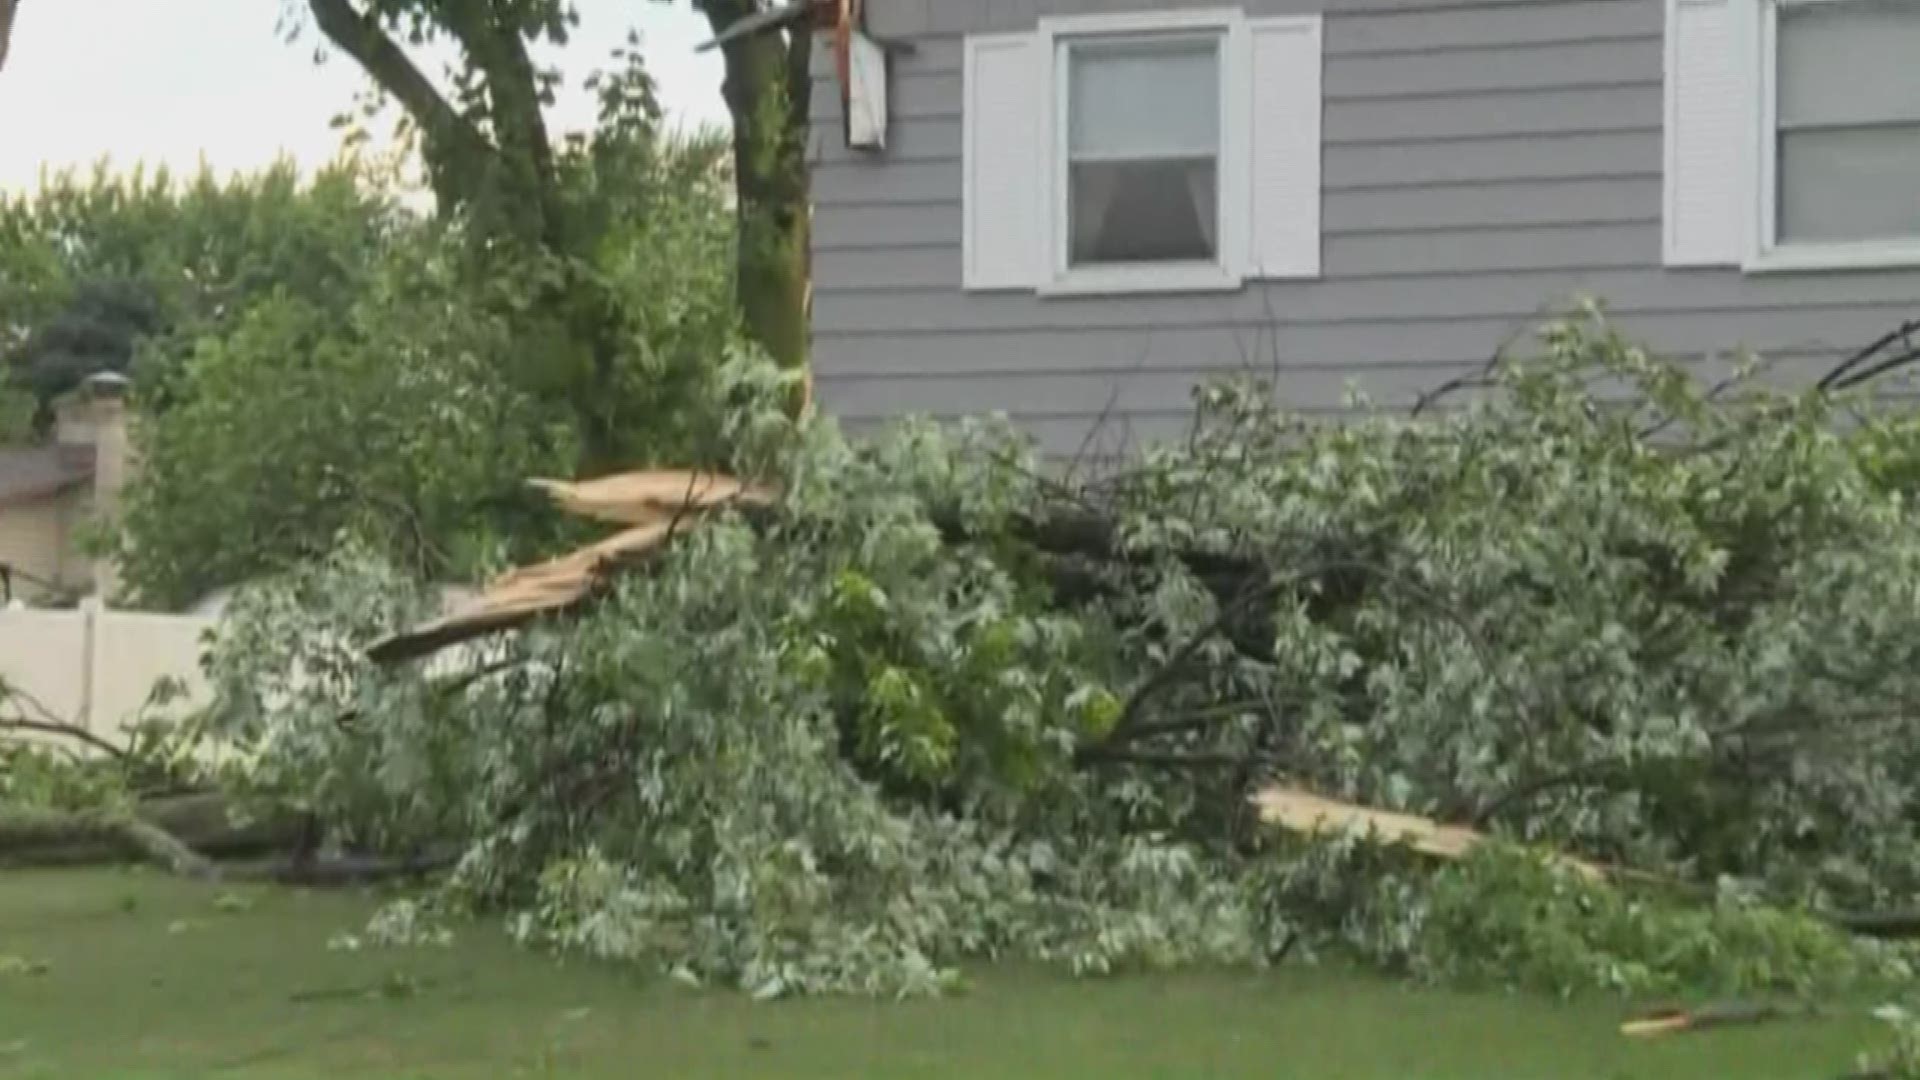 Debris was strewn across the roads throughout West Michigan as well as the yards of many residents.